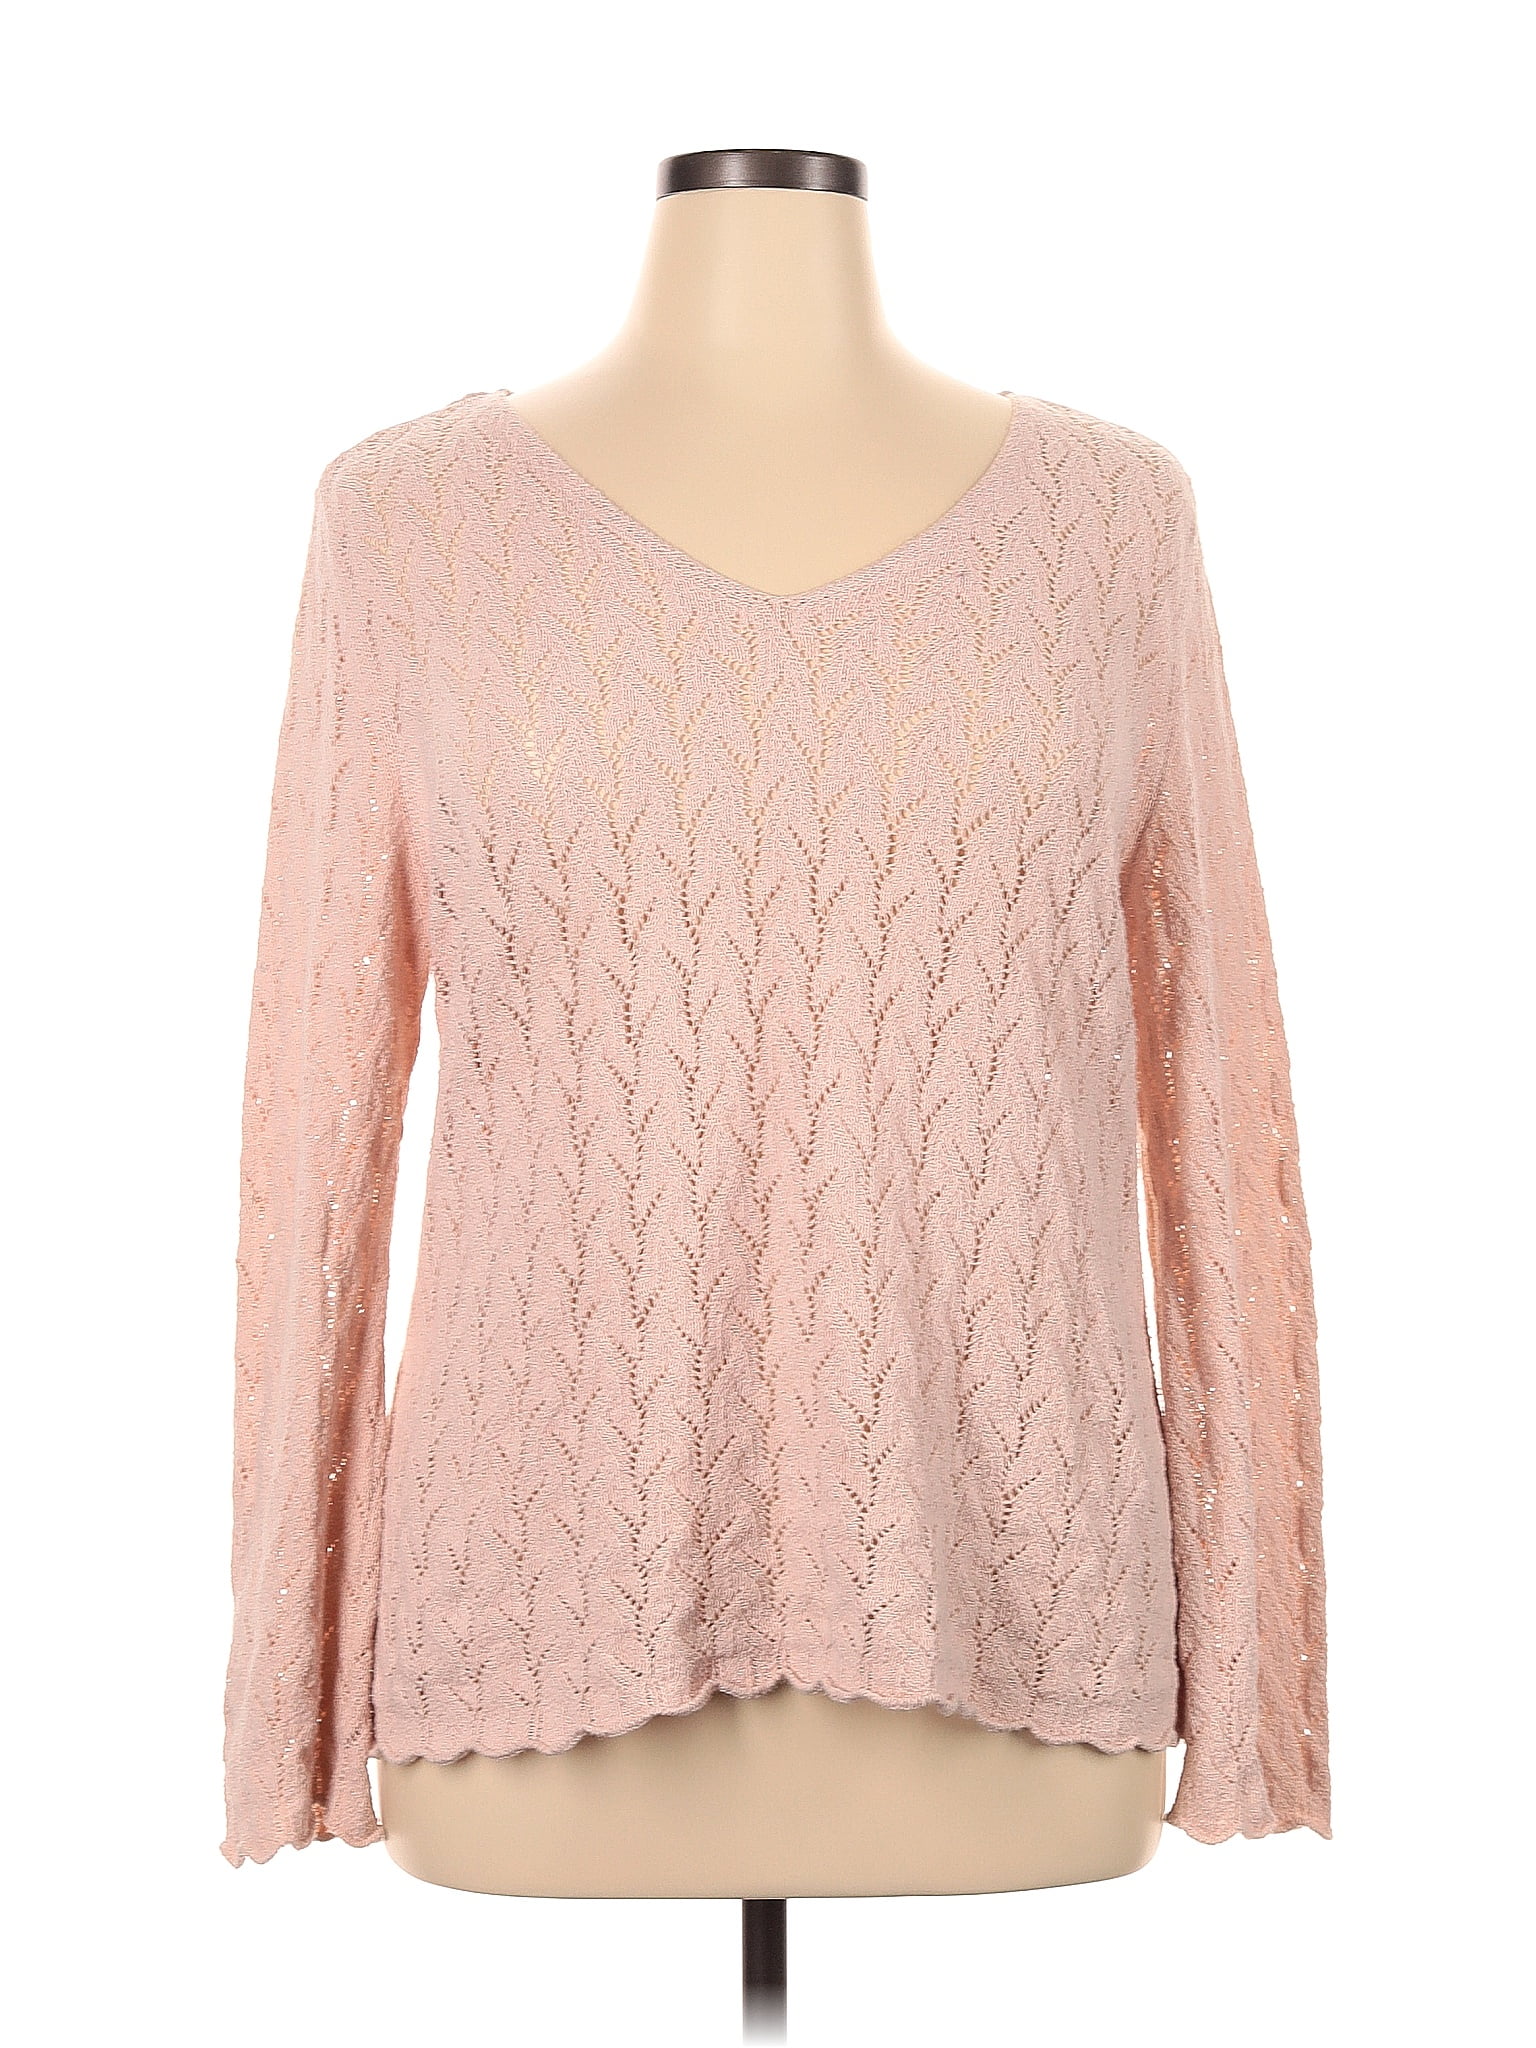 J.Jill Color Block Pink Pullover Sweater Size S (Tall) - 76% off